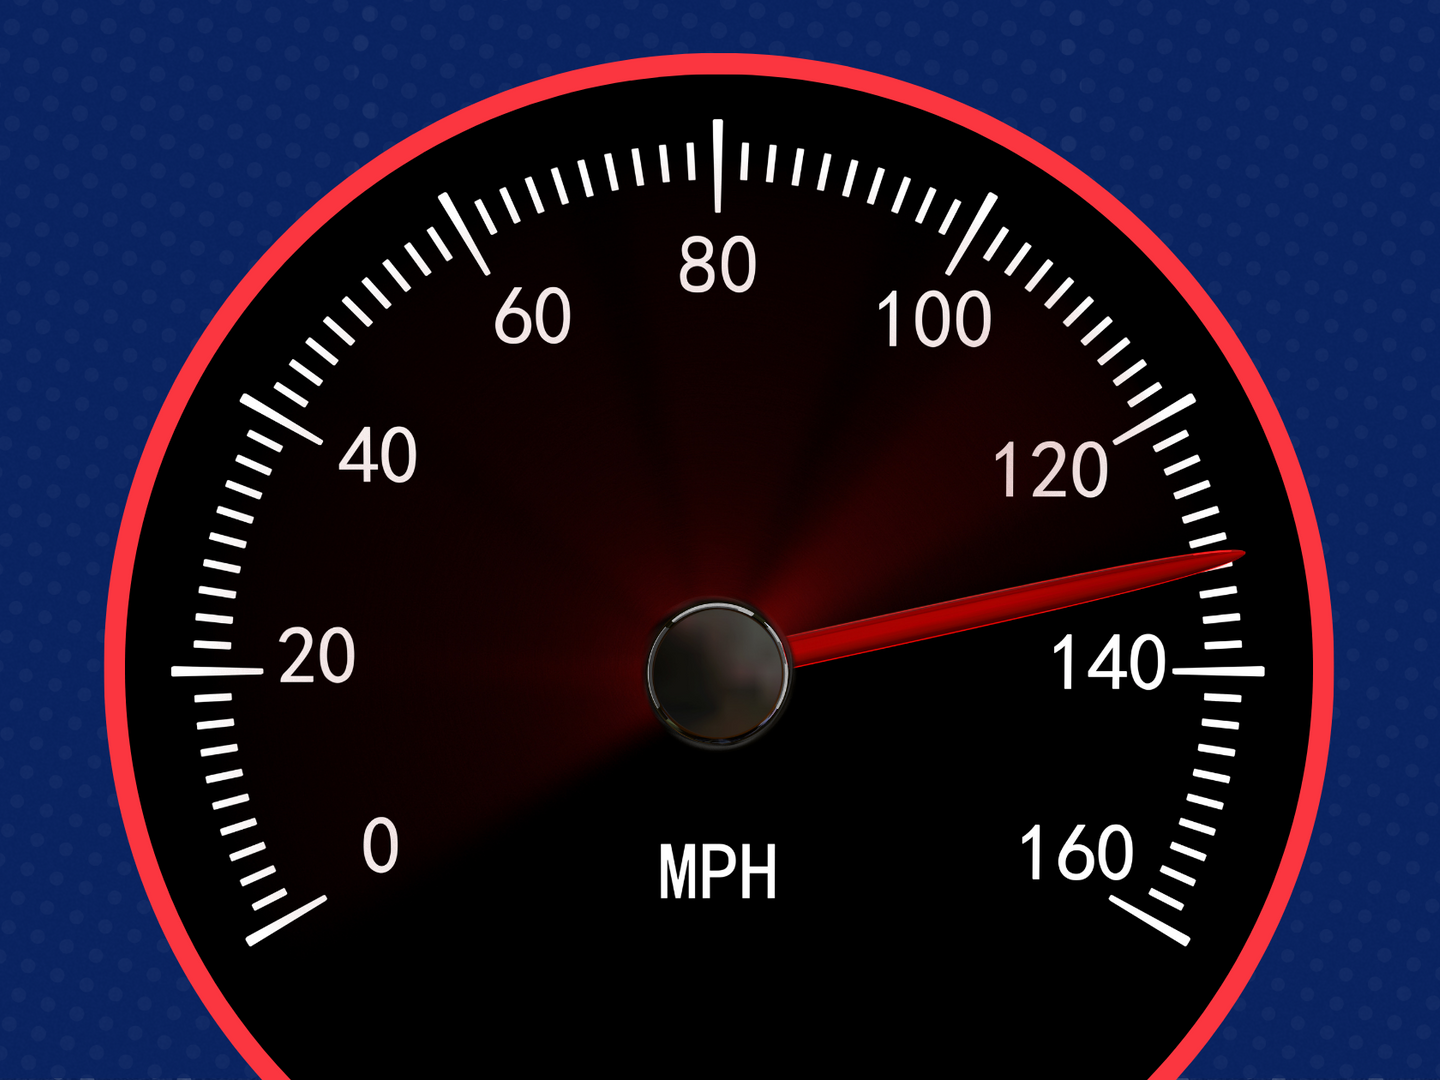 a speedometer shows a speed of 160 mph